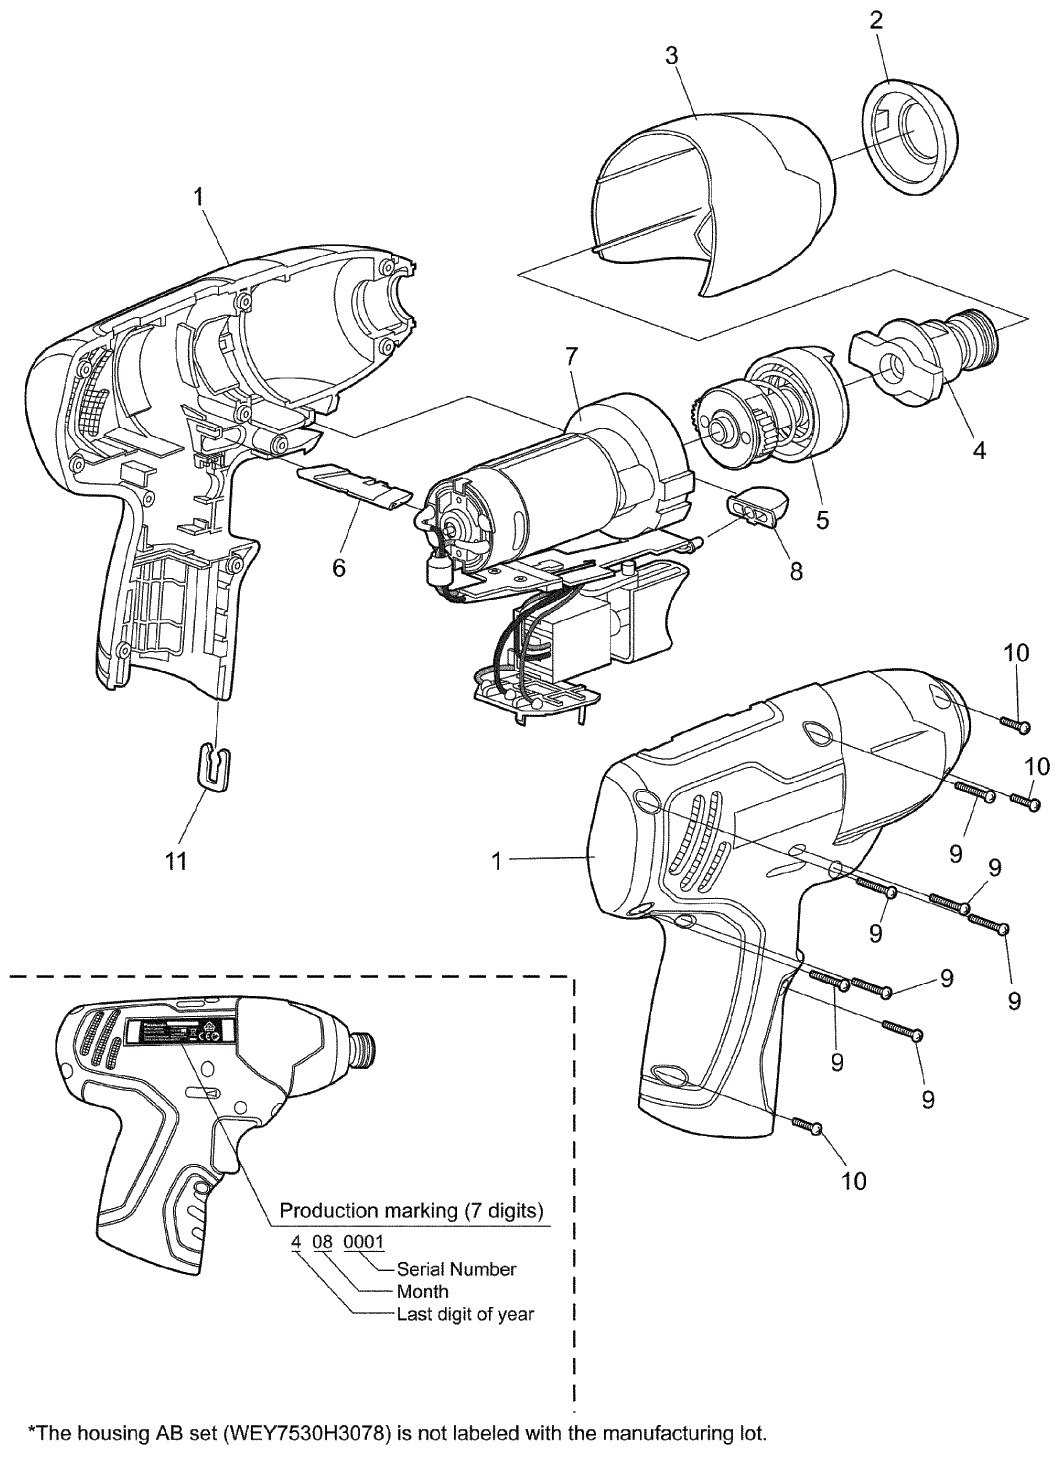 EY7530: Exploded View